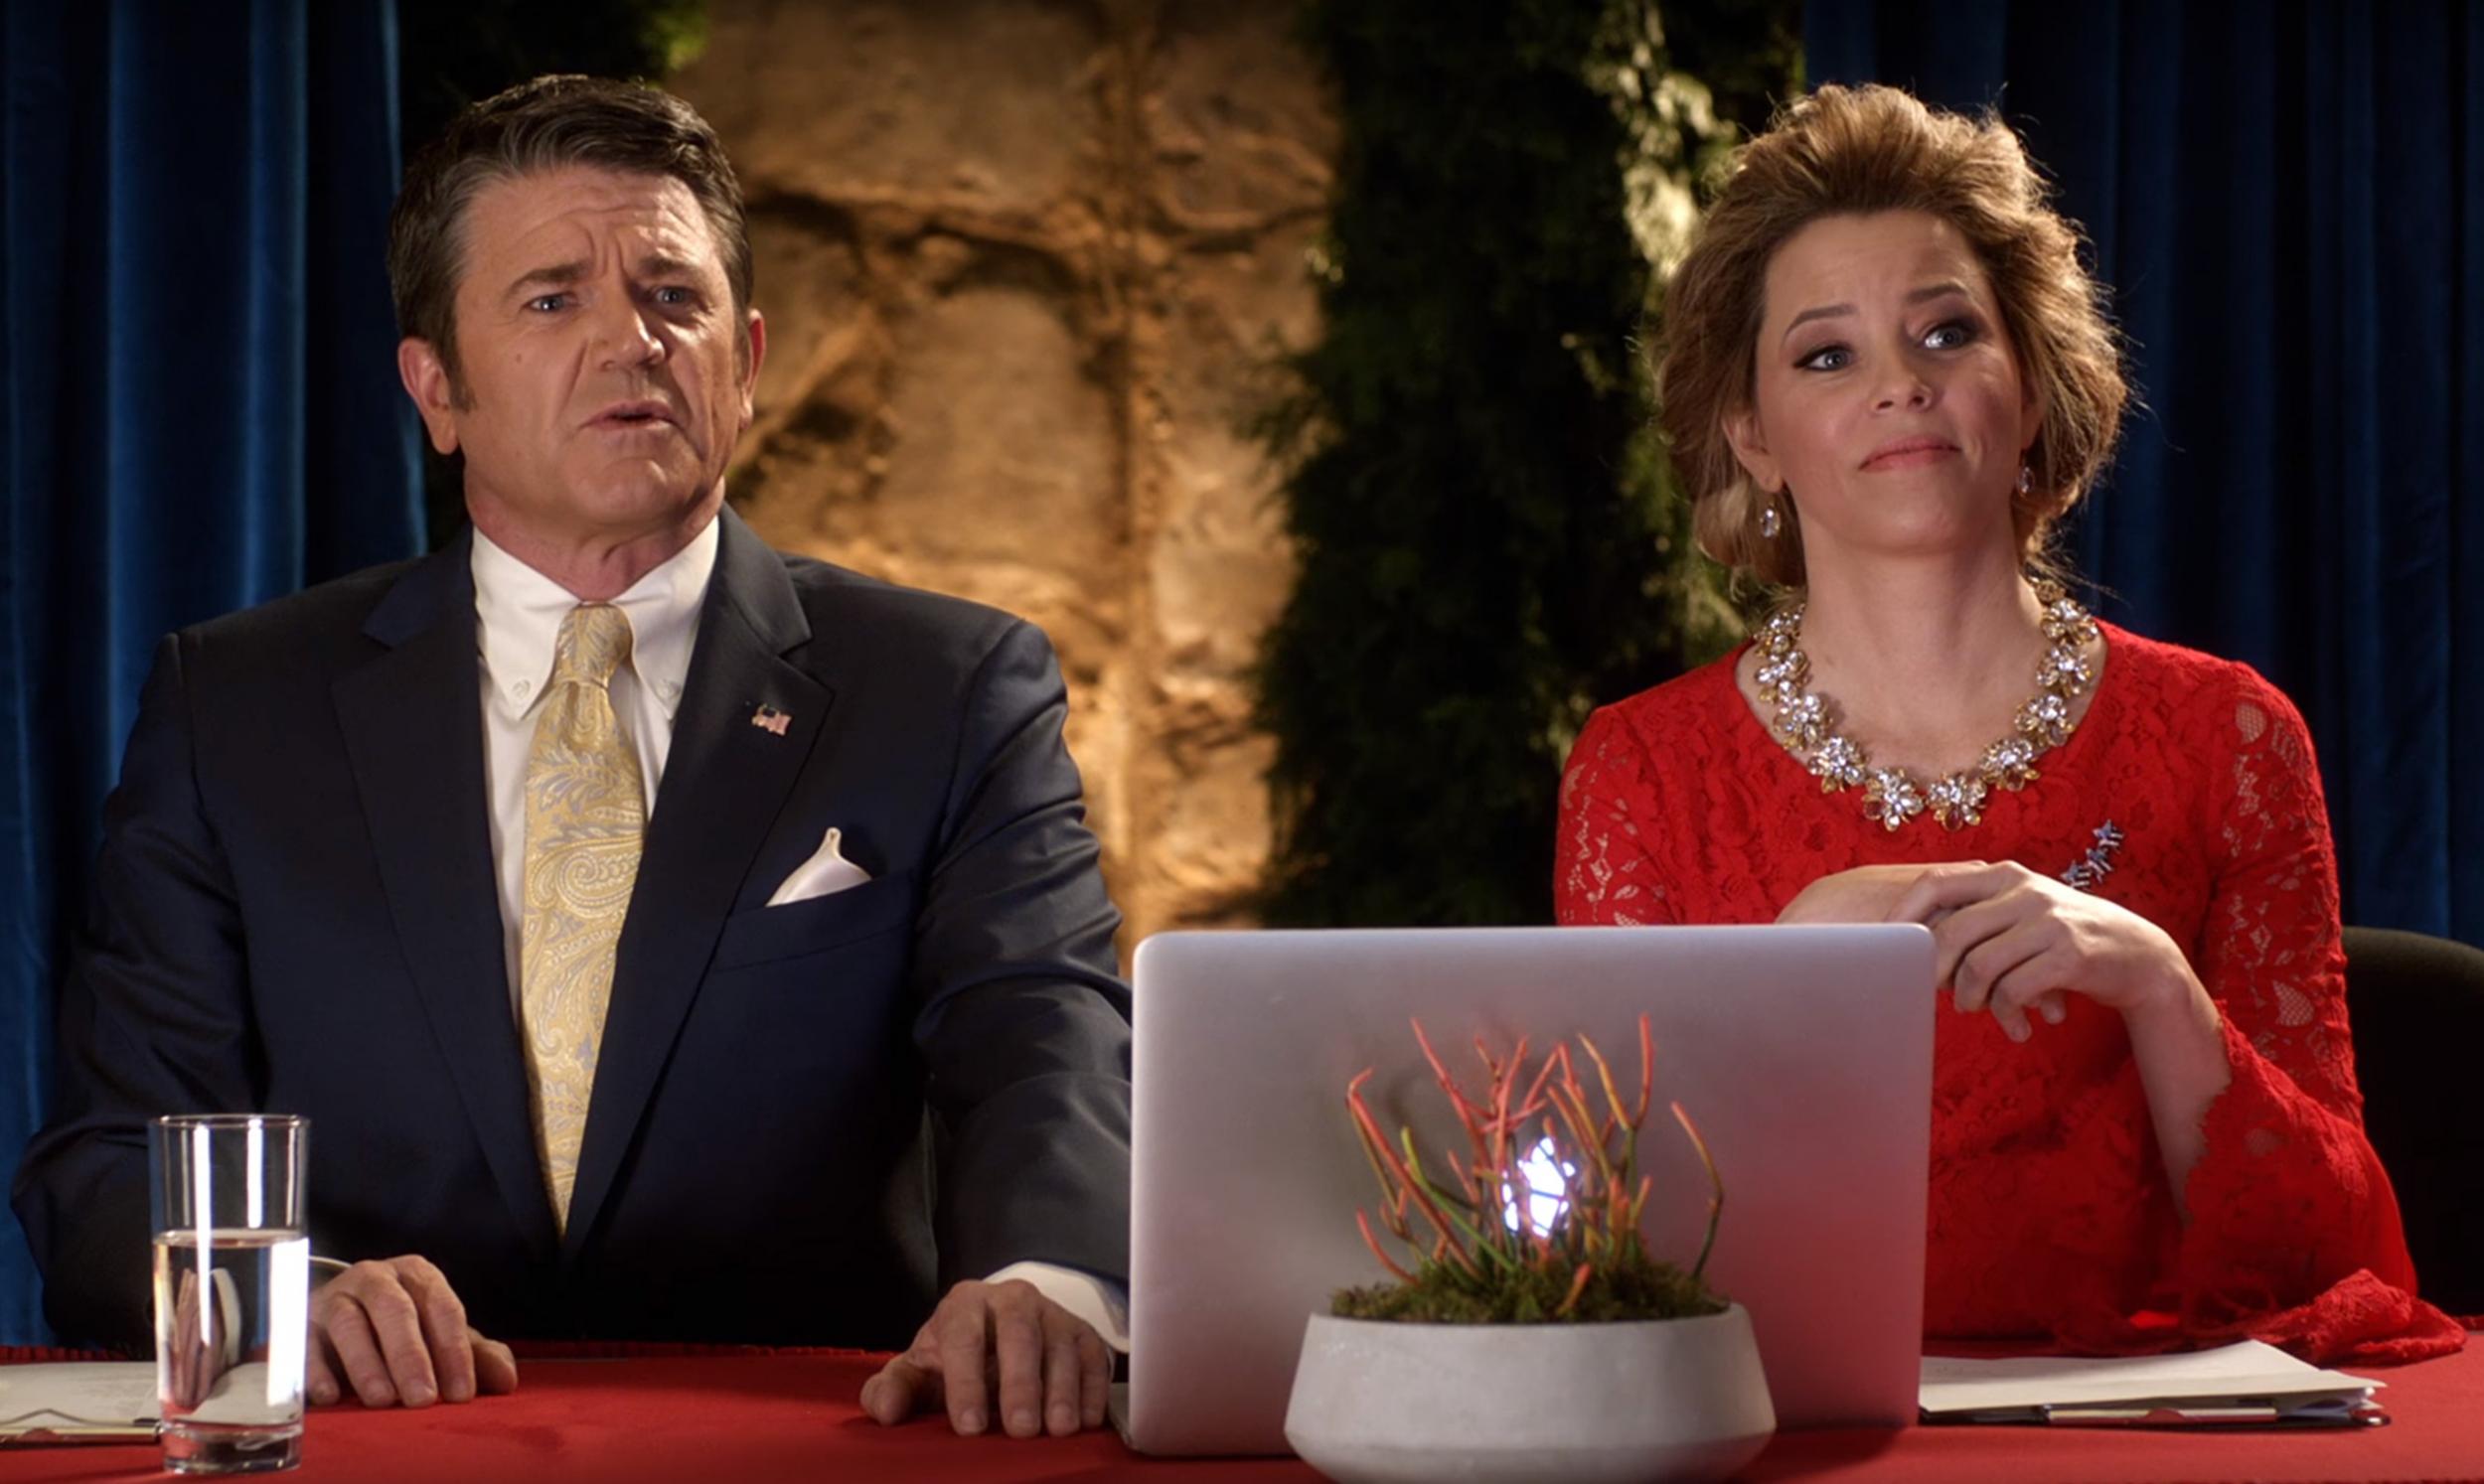 Elizabeth Banks with John Michael Higgins in ‘Pitch Perfect 3’. Banks’s film company Brownstone Productions is behind the Pitch Perfect franchise